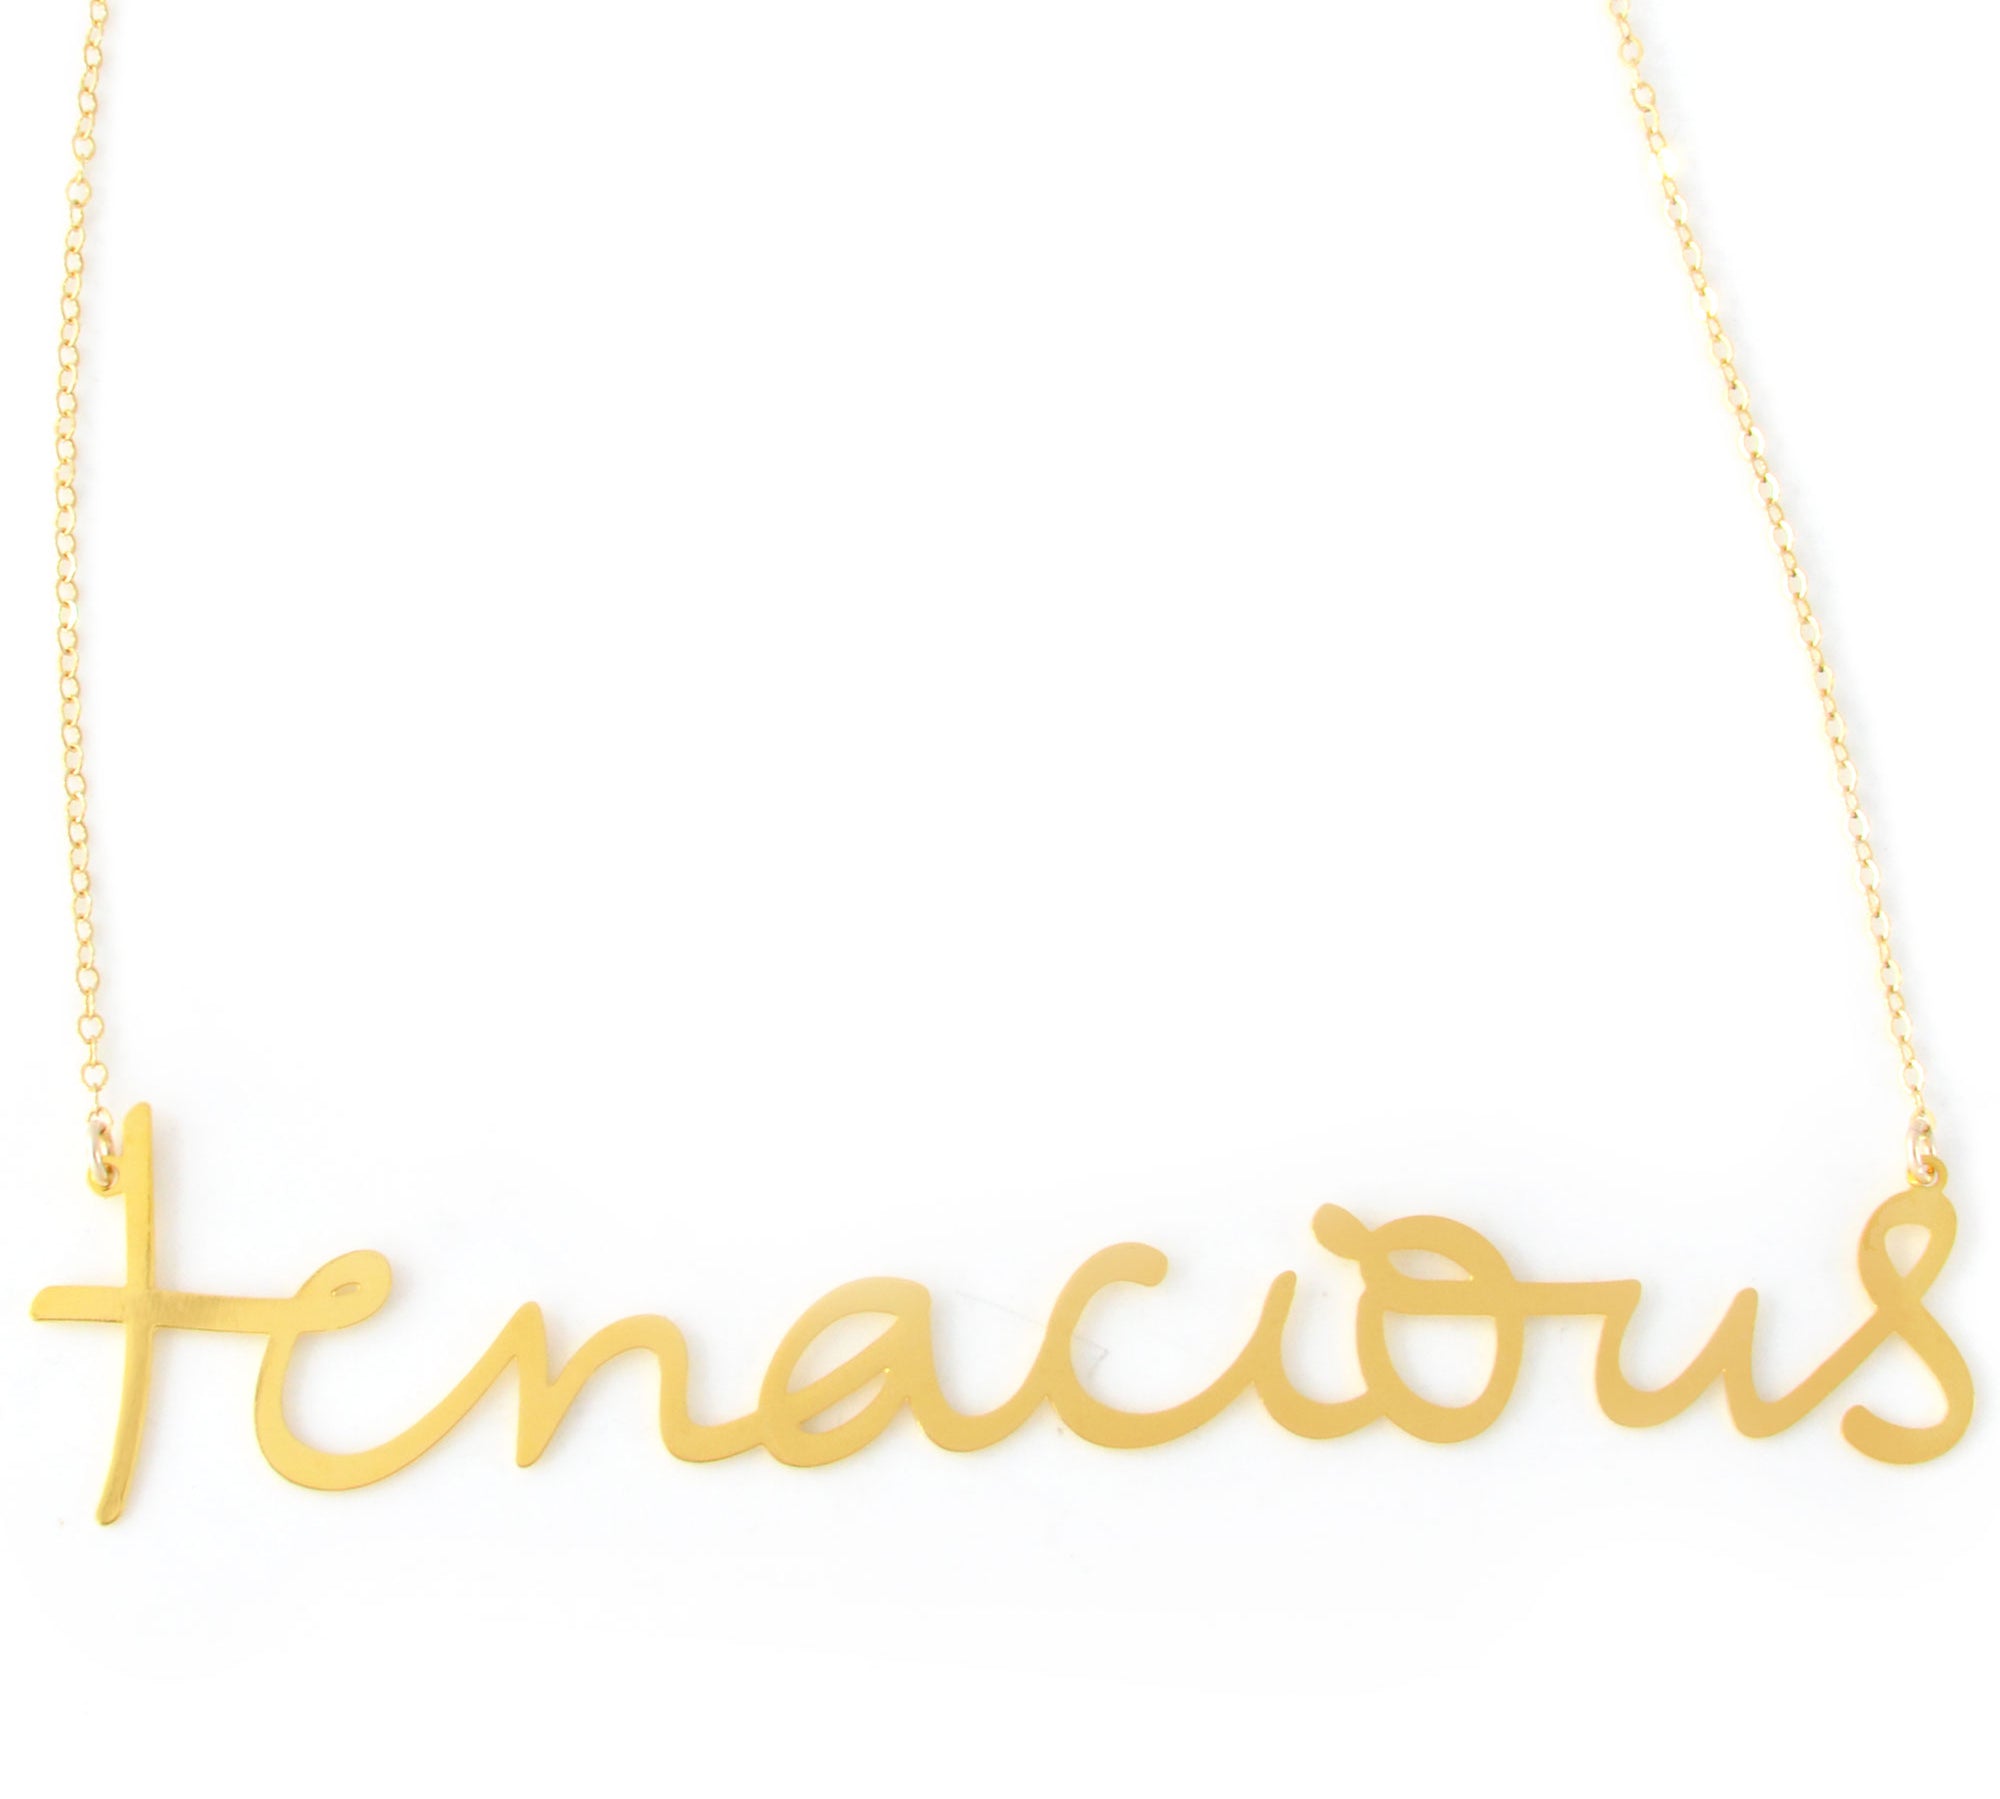 Tenacious Necklace - High Quality, Affordable, Hand Written, Empowering, Self Love, Mantra Word Necklace - Available in Gold and Silver - Small and Large Sizes - Made in USA - Brevity Jewelry